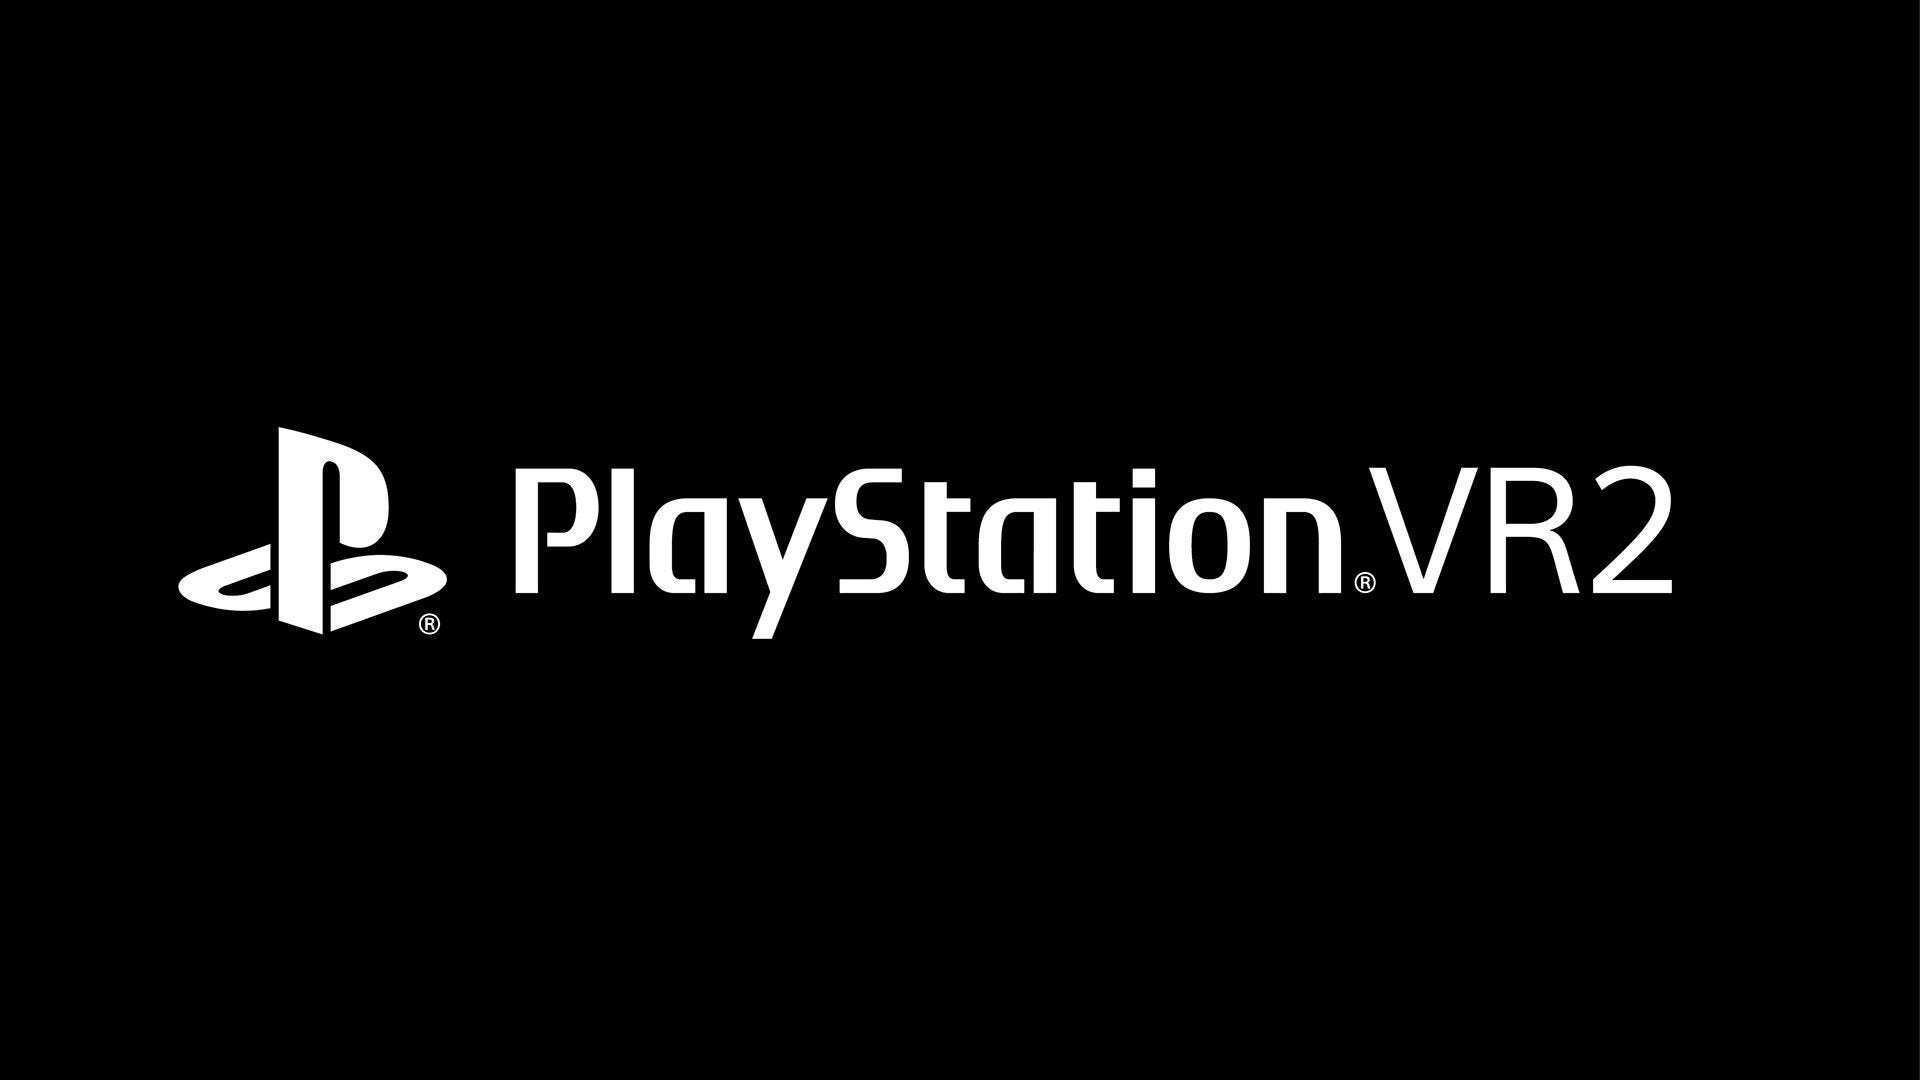 image for PlayStation VR2 and PlayStation VR2 Sense controller: the next generation of VR gaming on PS5